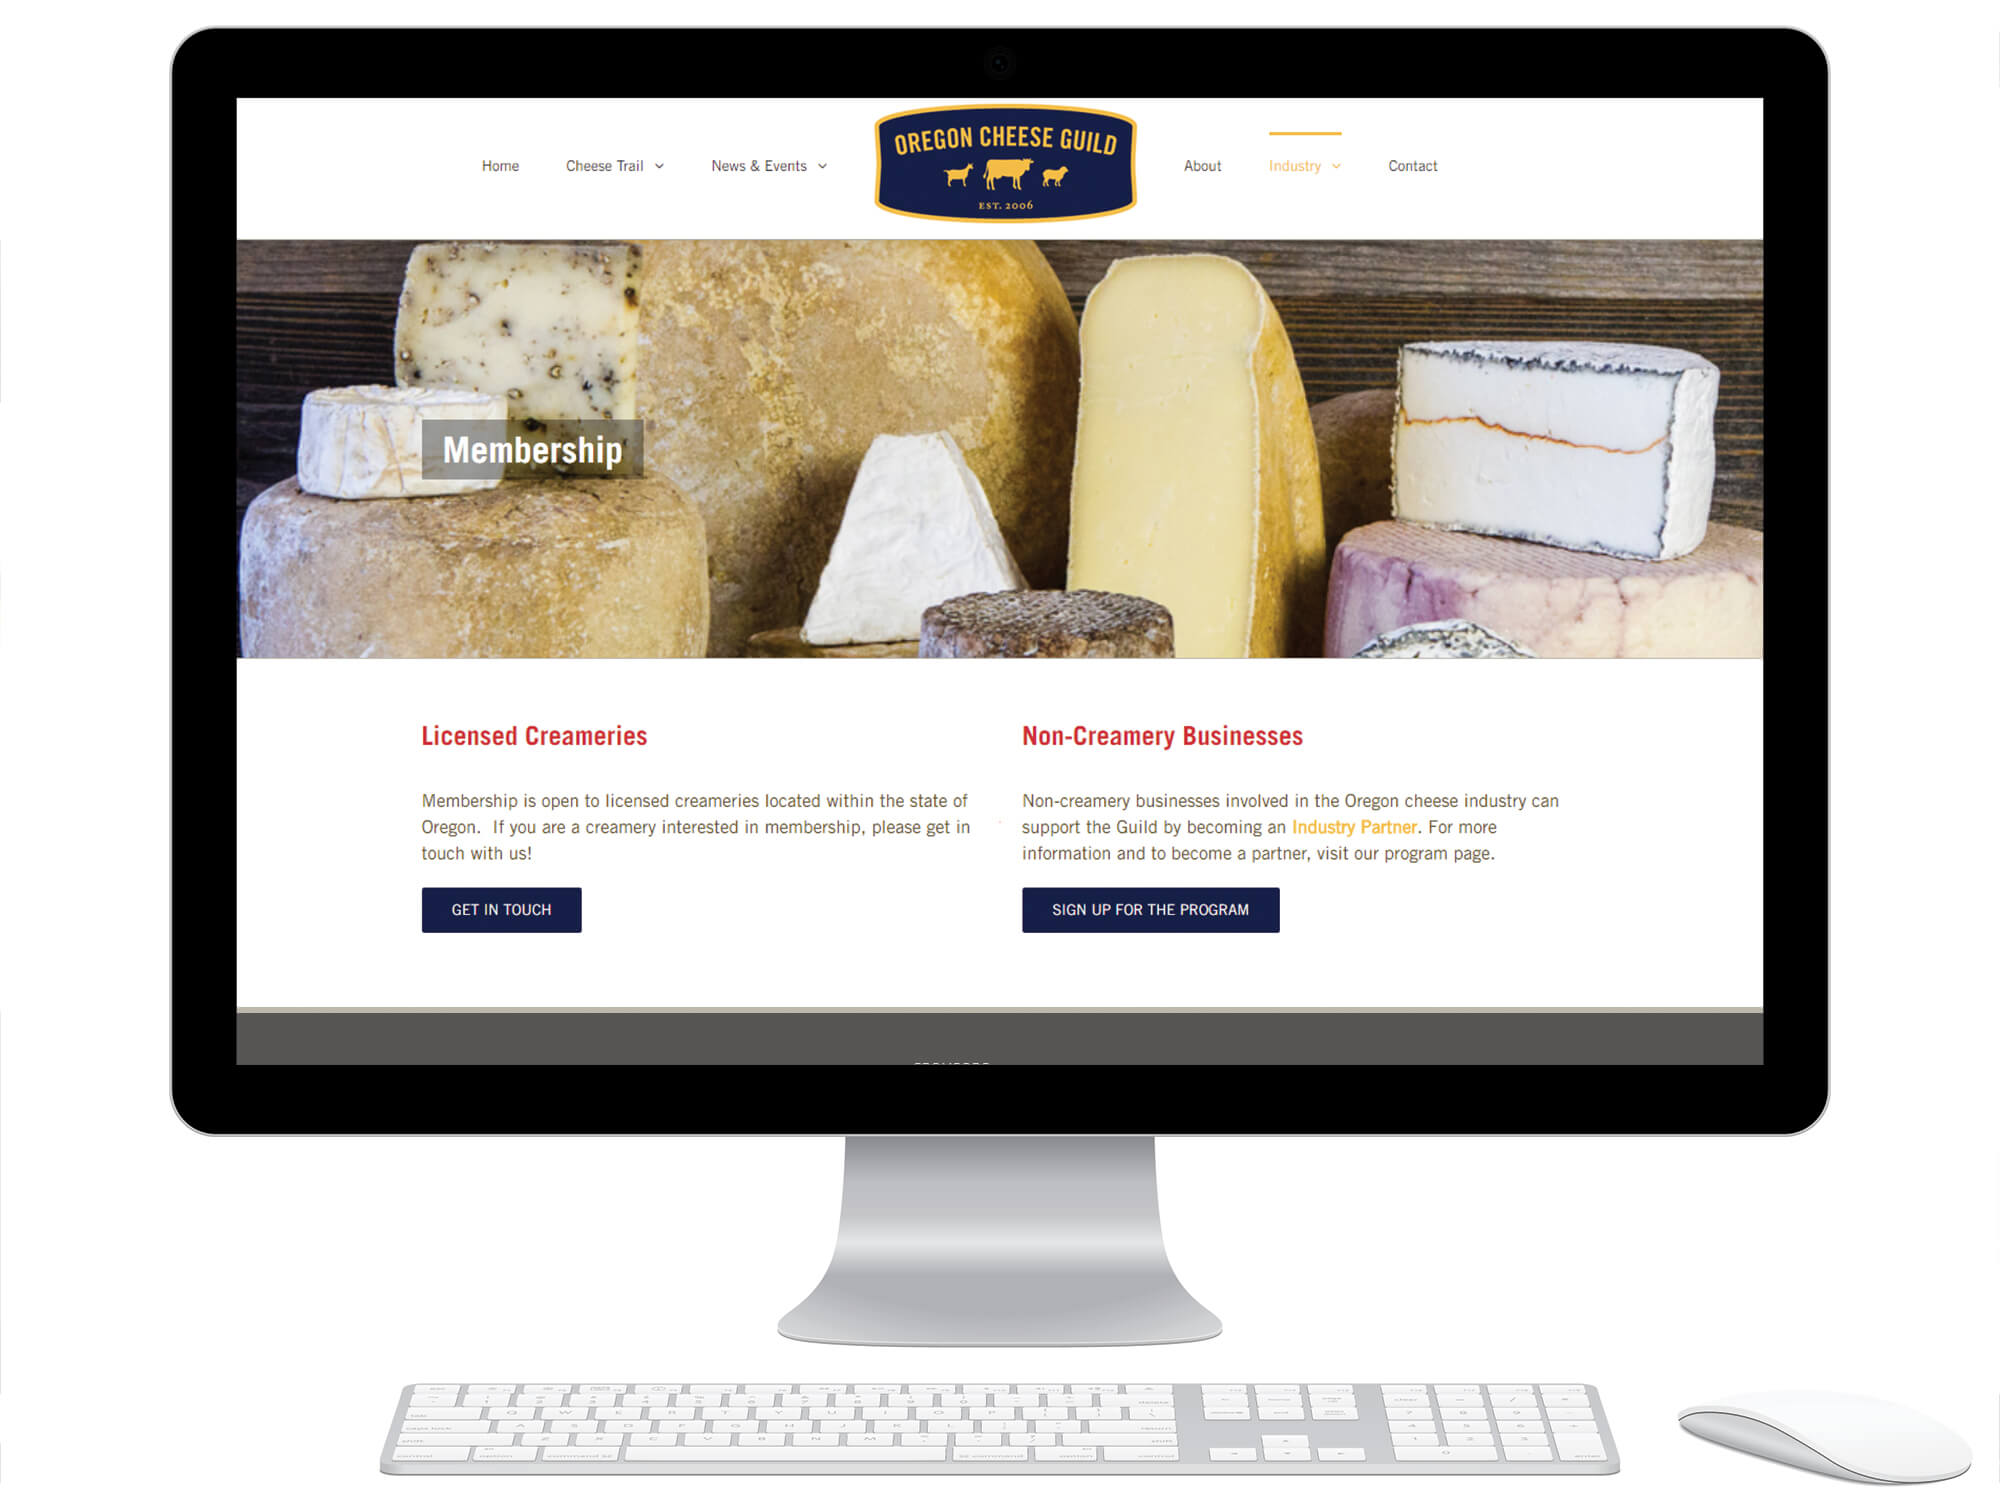 Desktop computer displaying the membership page of the Oregon Cheese Guild website